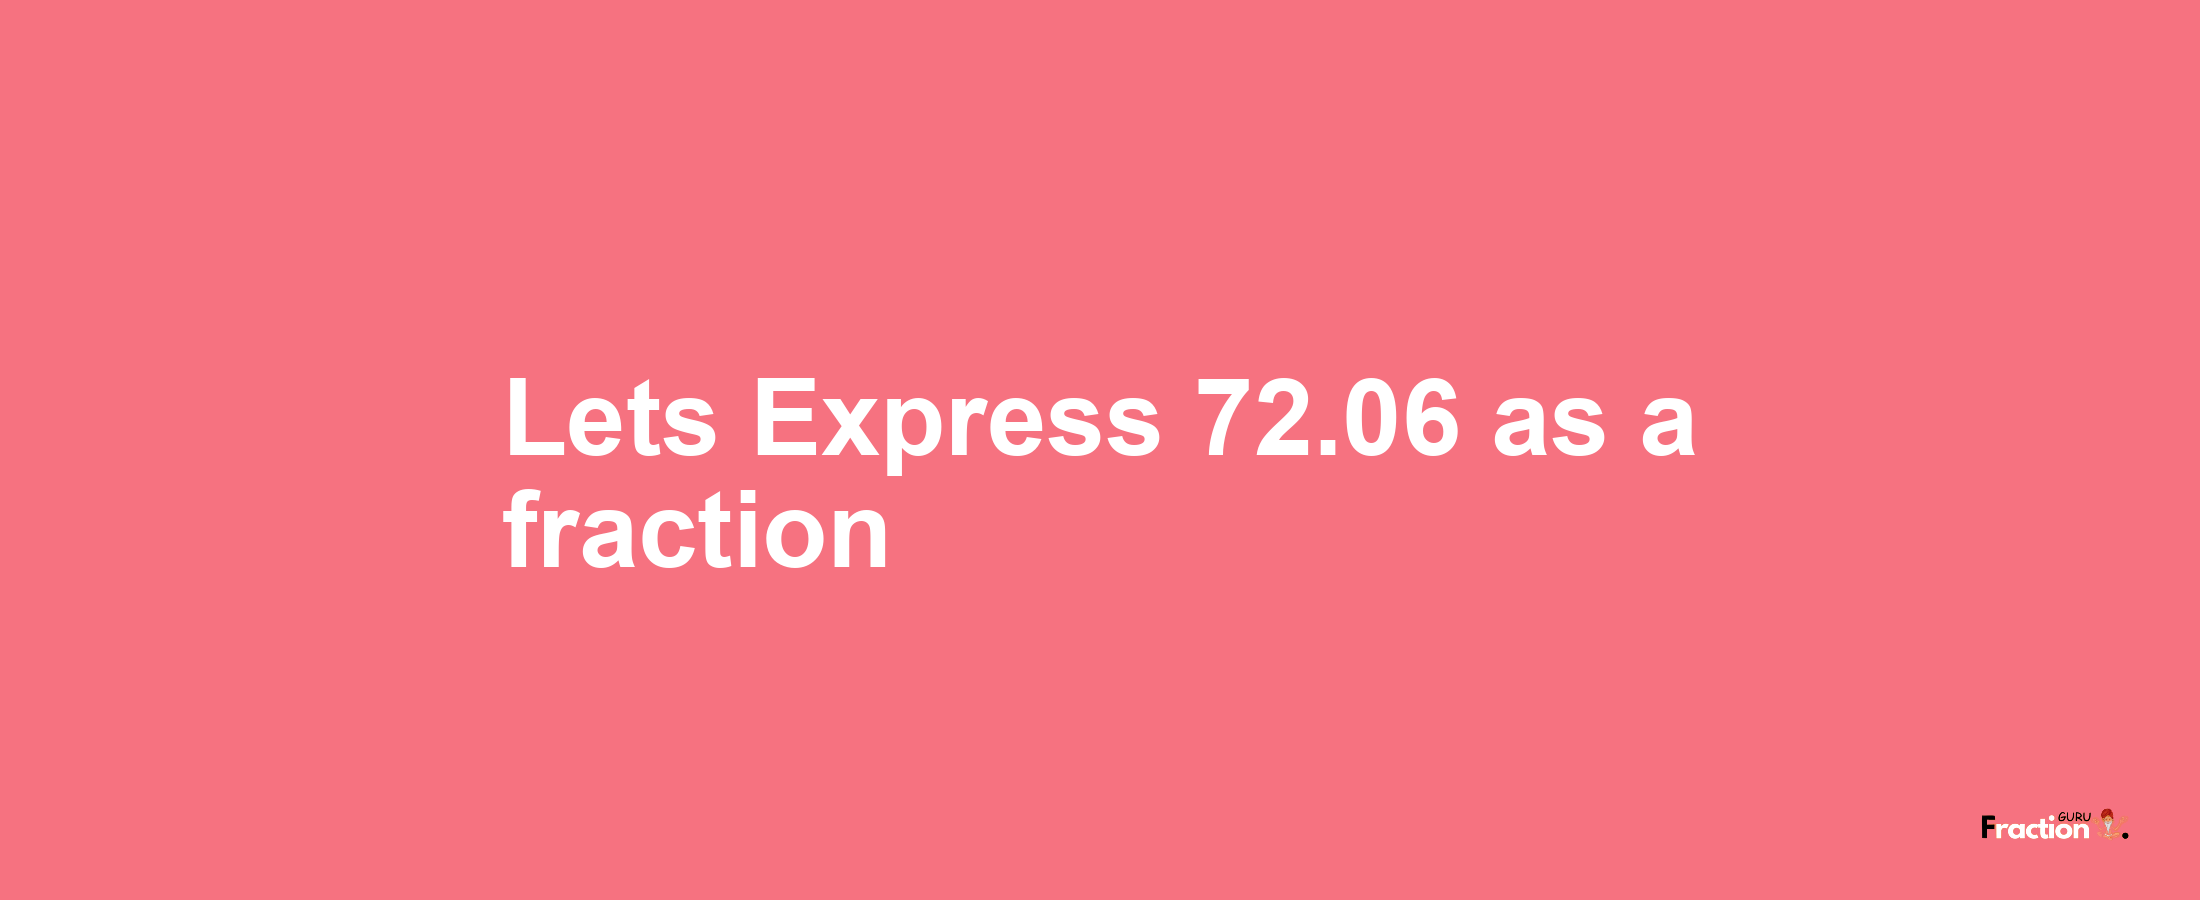 Lets Express 72.06 as afraction